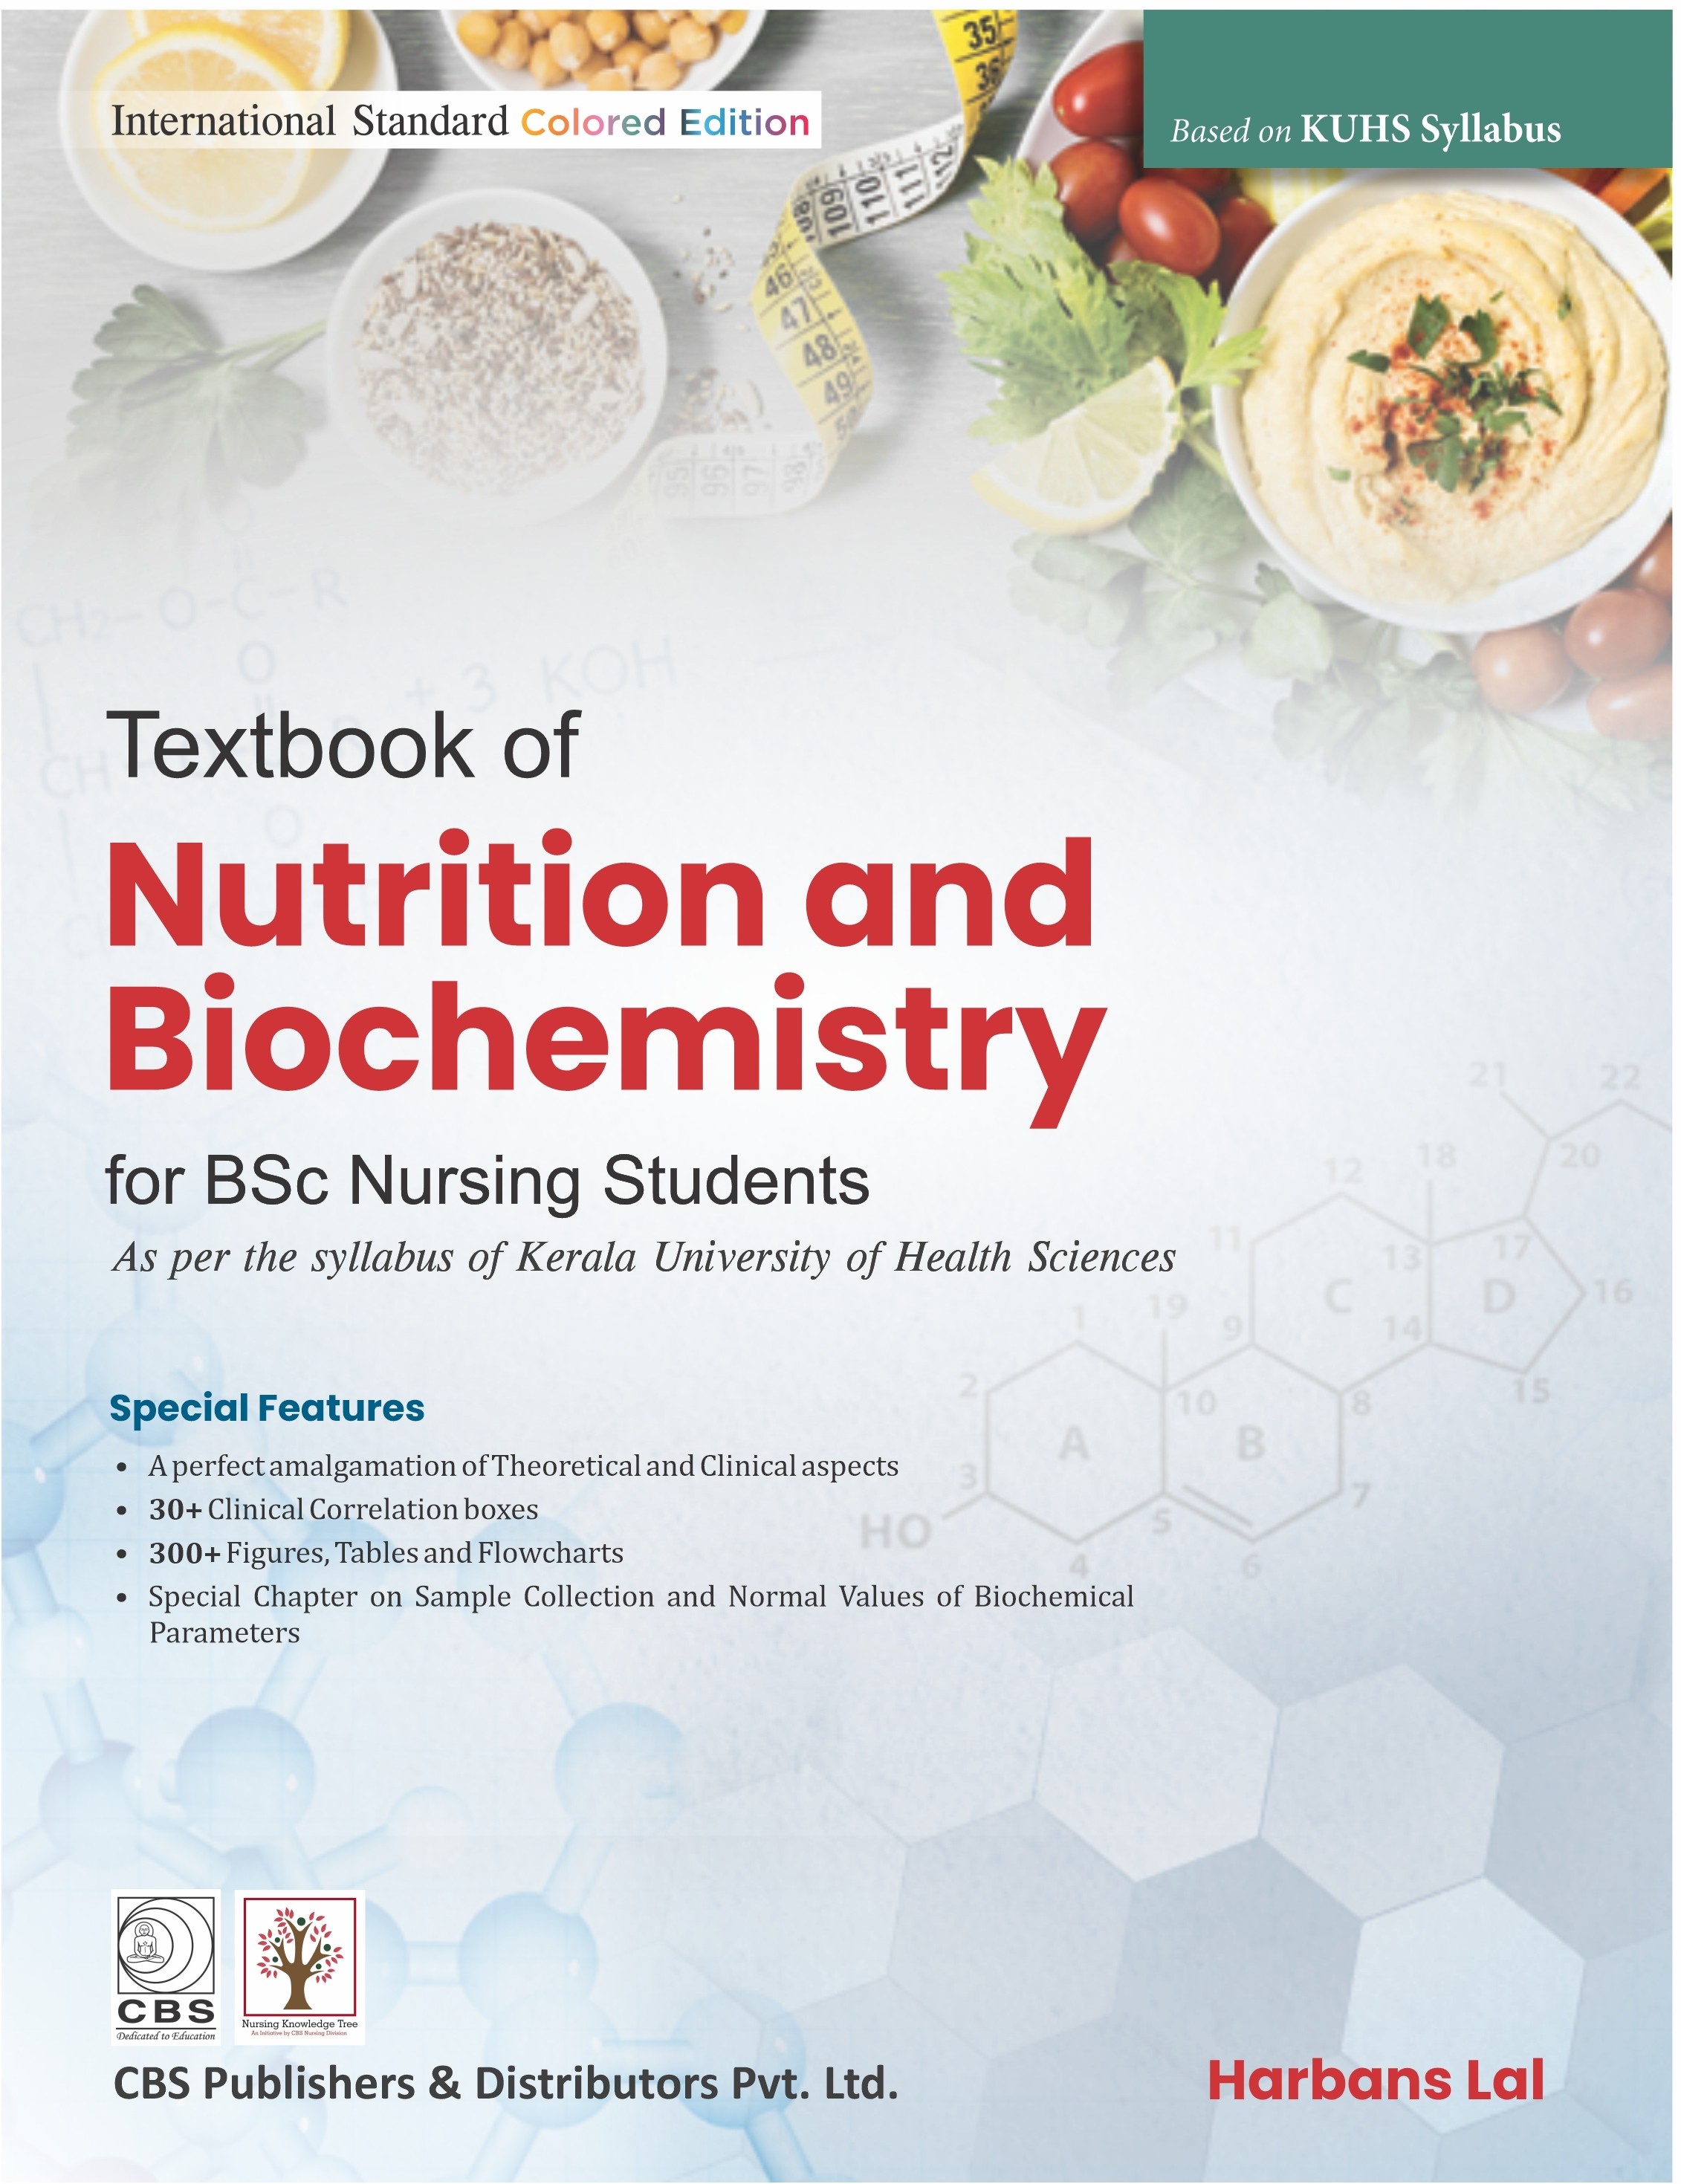 Textbook of Nutrition and Biochemistry for BSc (Based on KUHS)